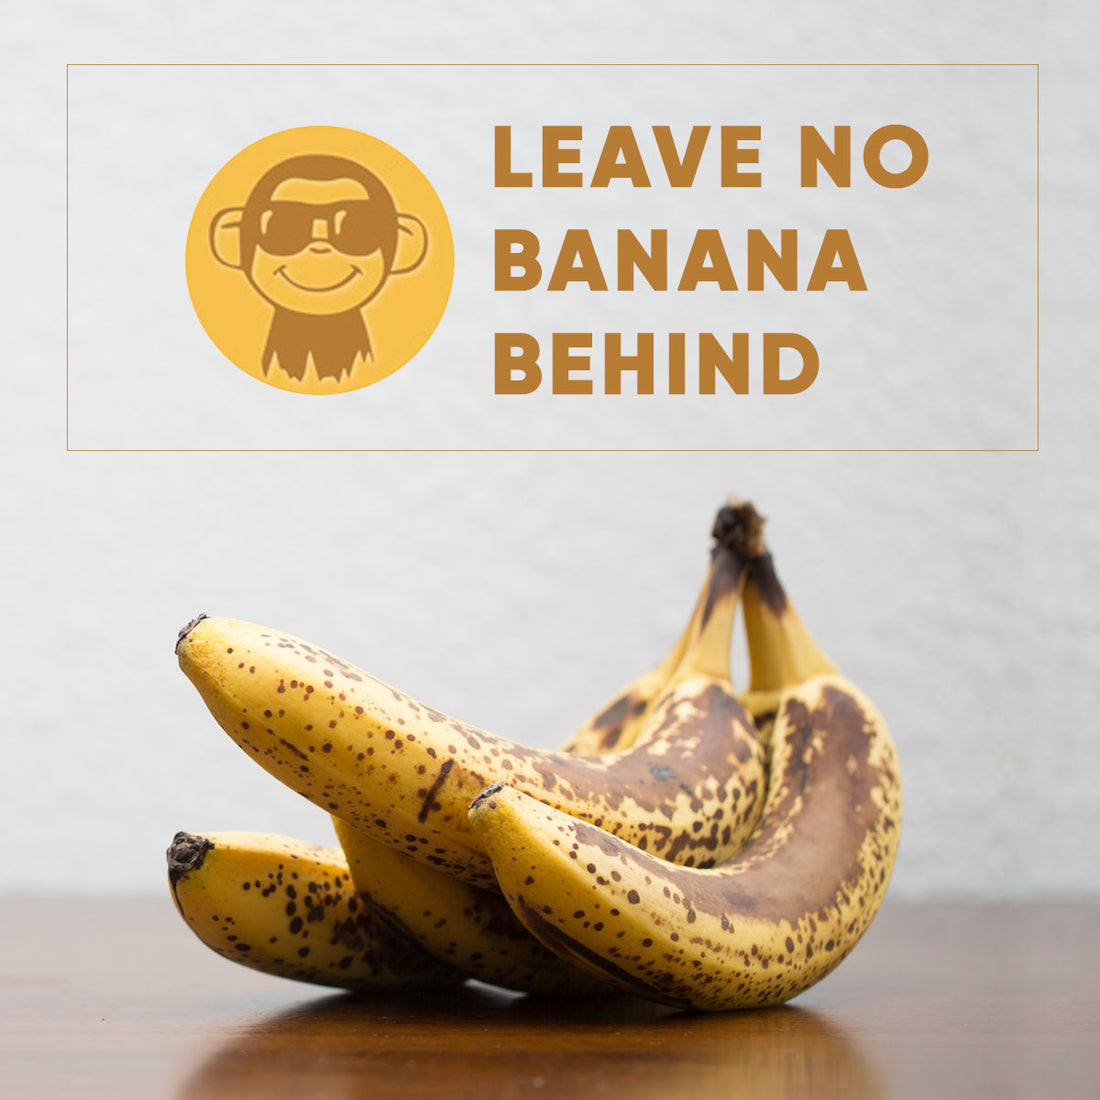 Old Bananas Are the New New...